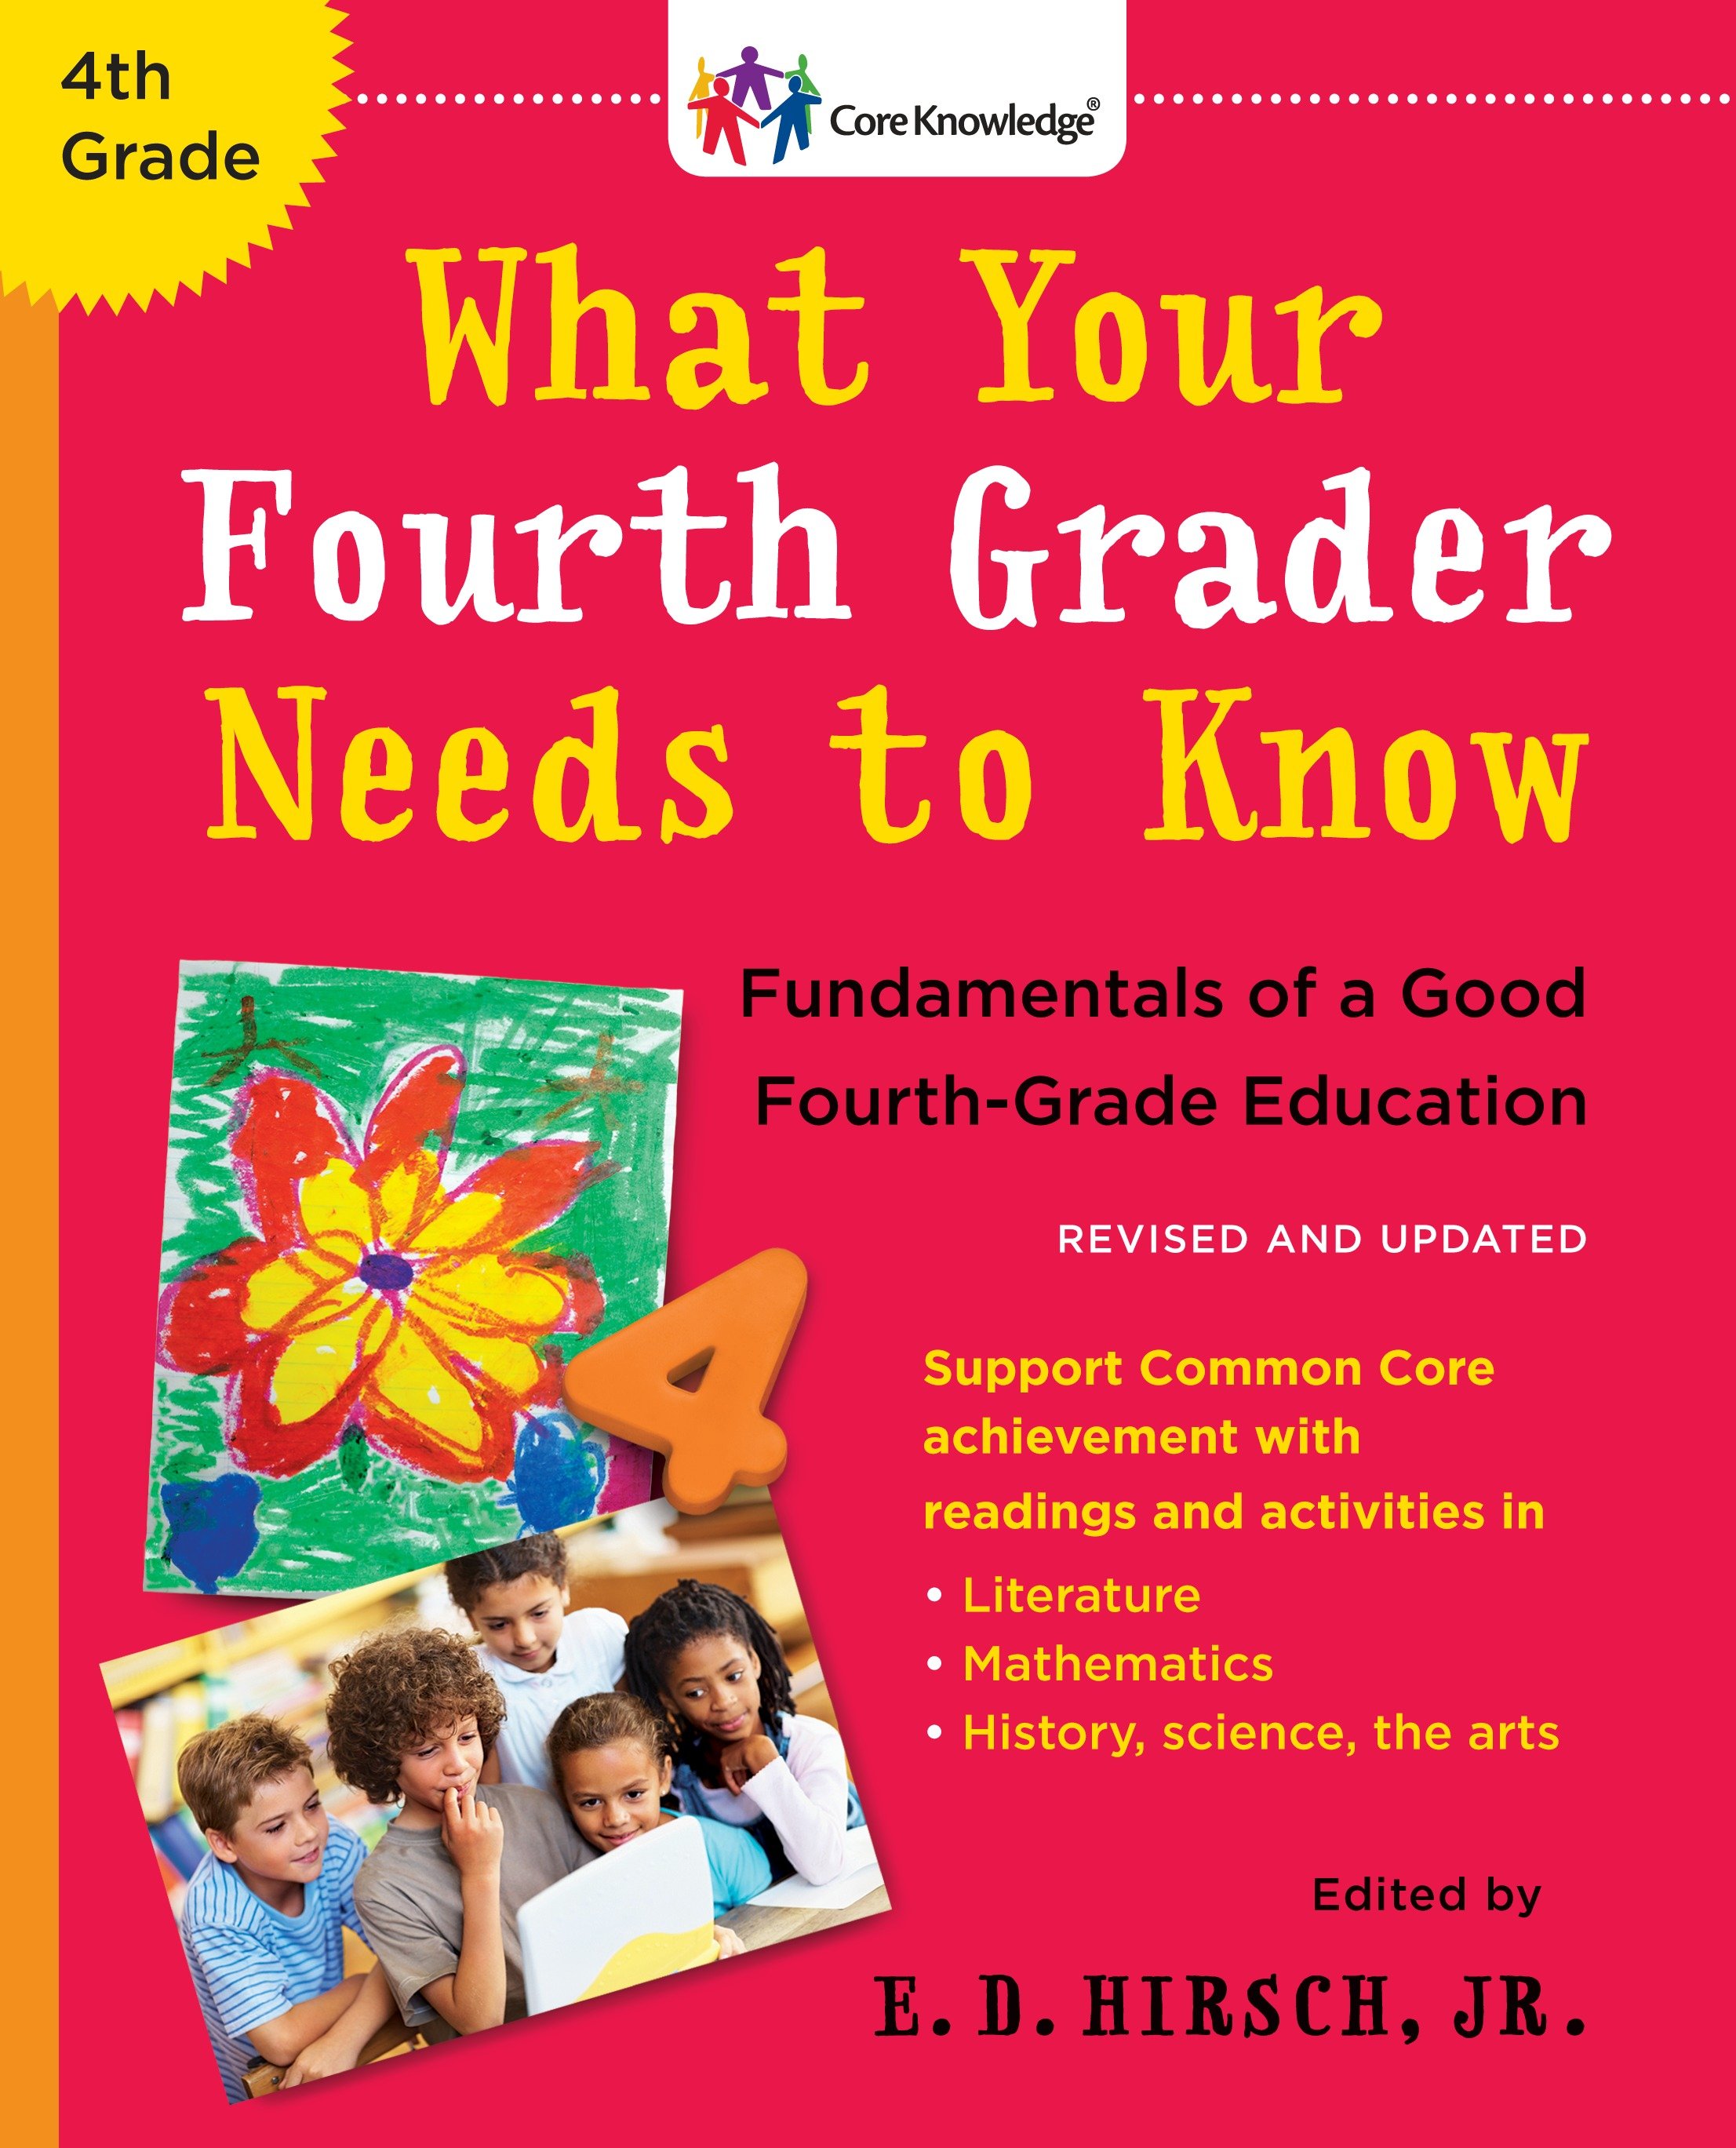 What Your Fourth Grader Needs to Know (Revised and Updated) Fundamentals of a Good Fourth-Grade Education cover image